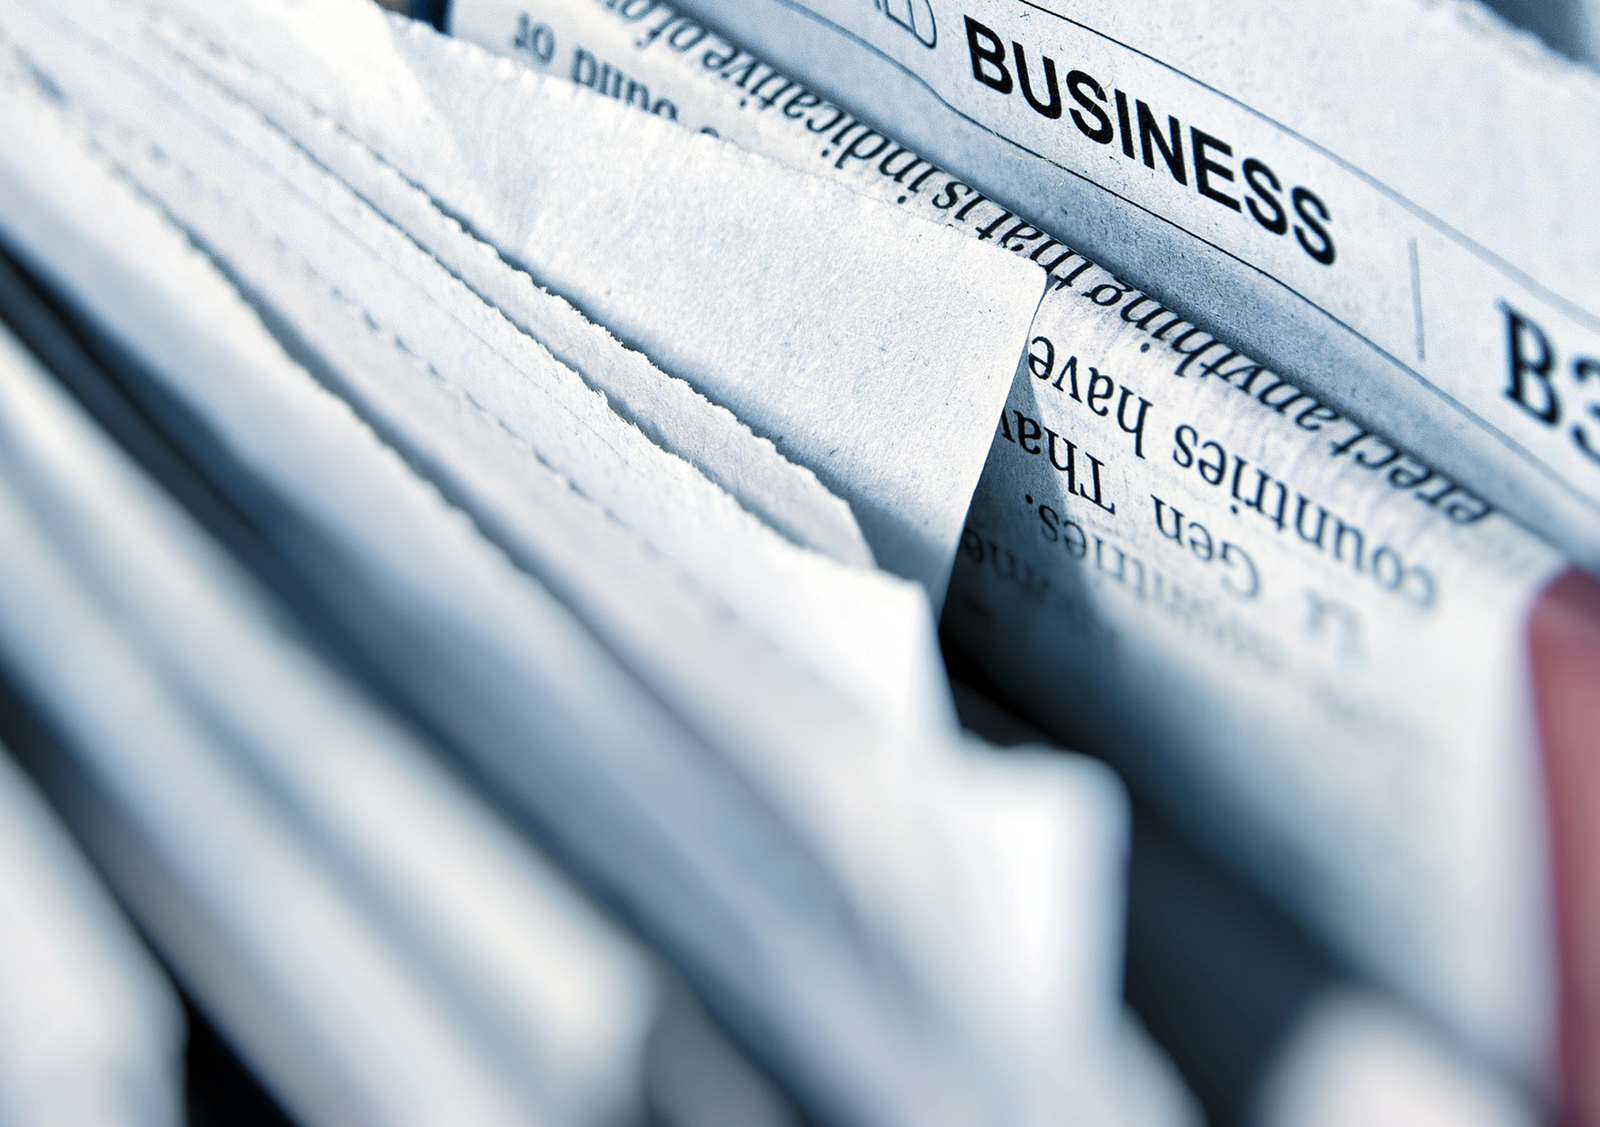 get press coverage to get your business noticed